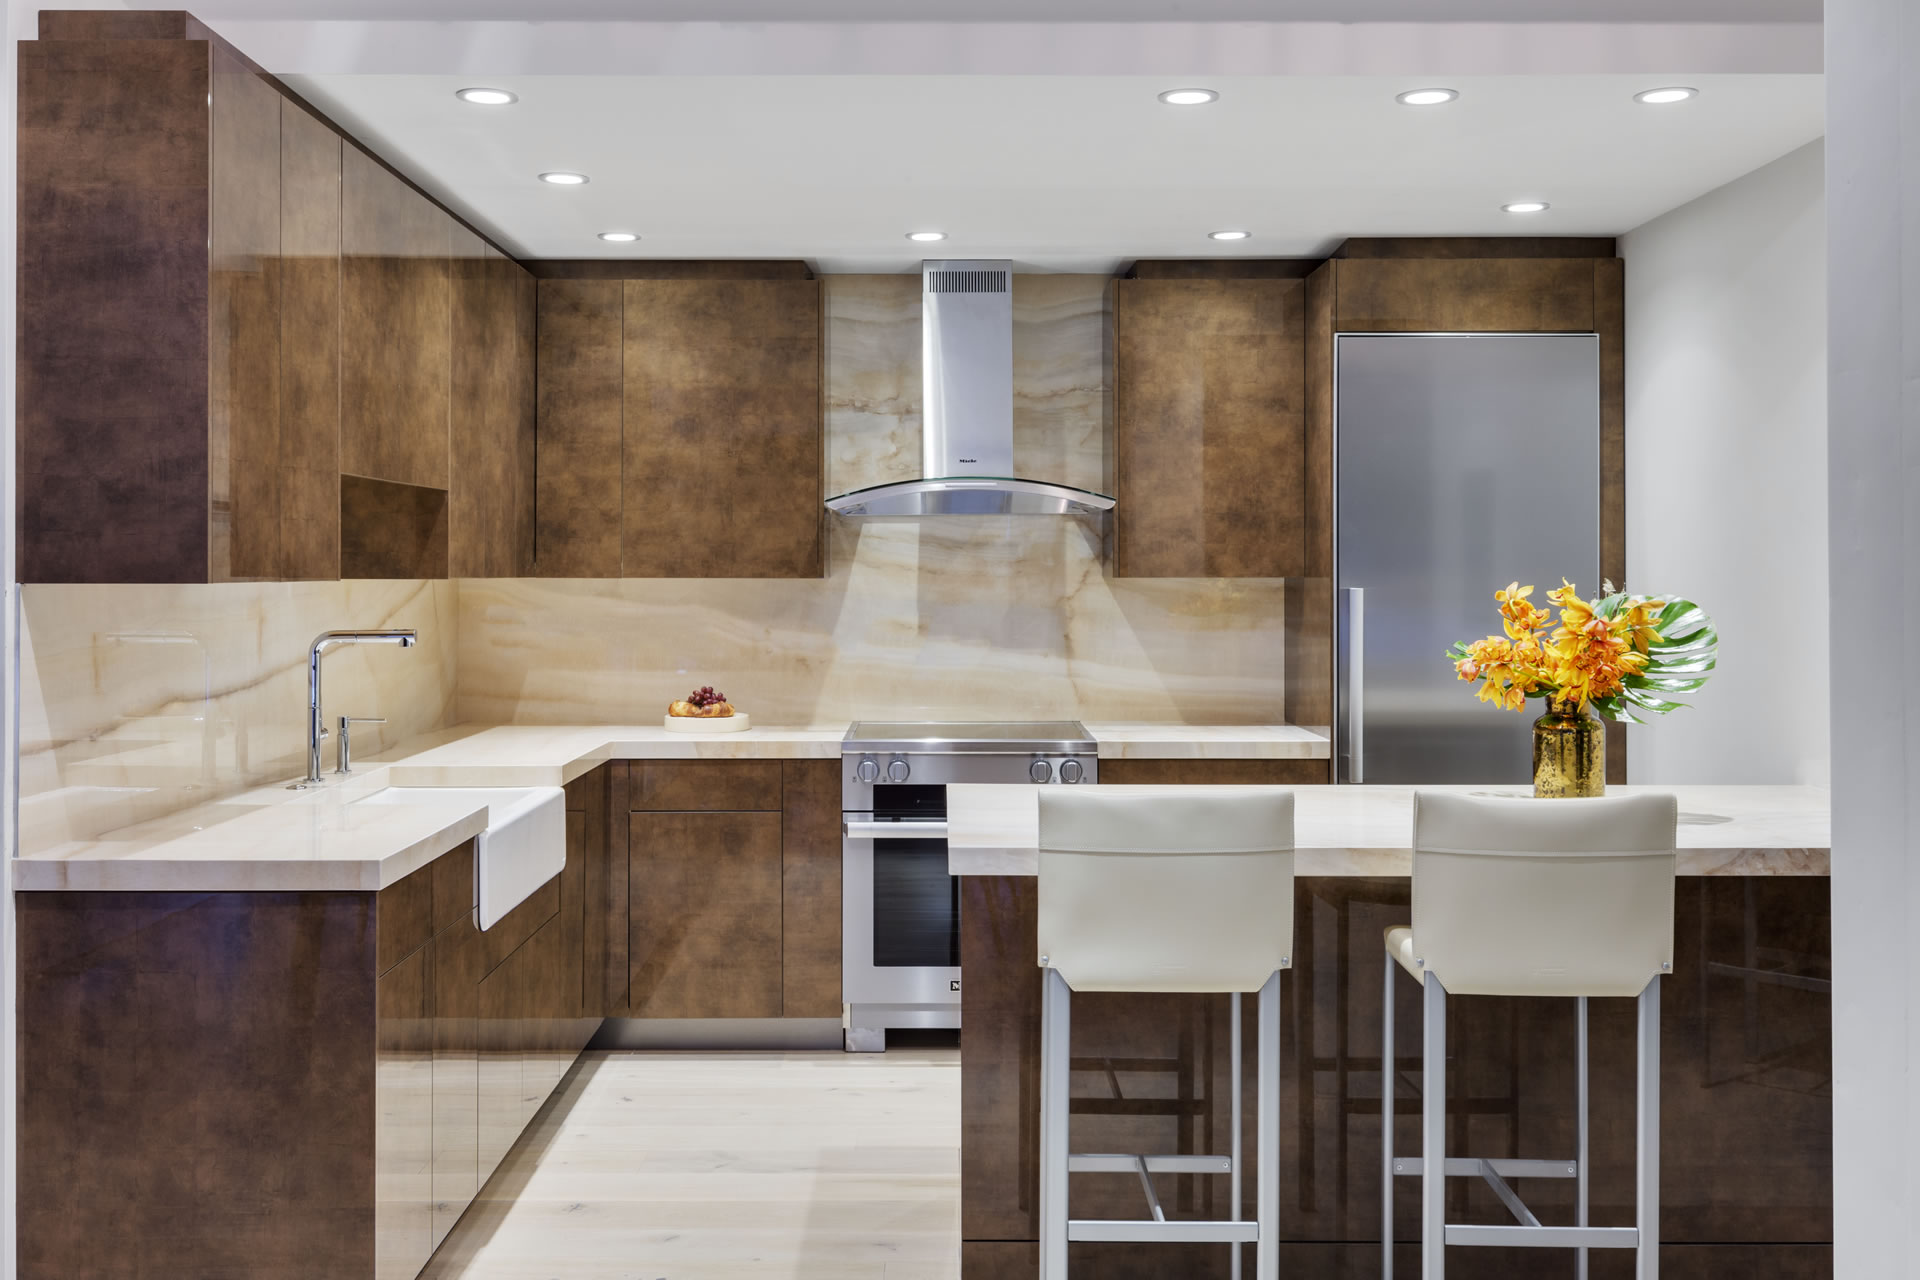 Newton Kitchens & Design - Truly hand-crafted cabinetry